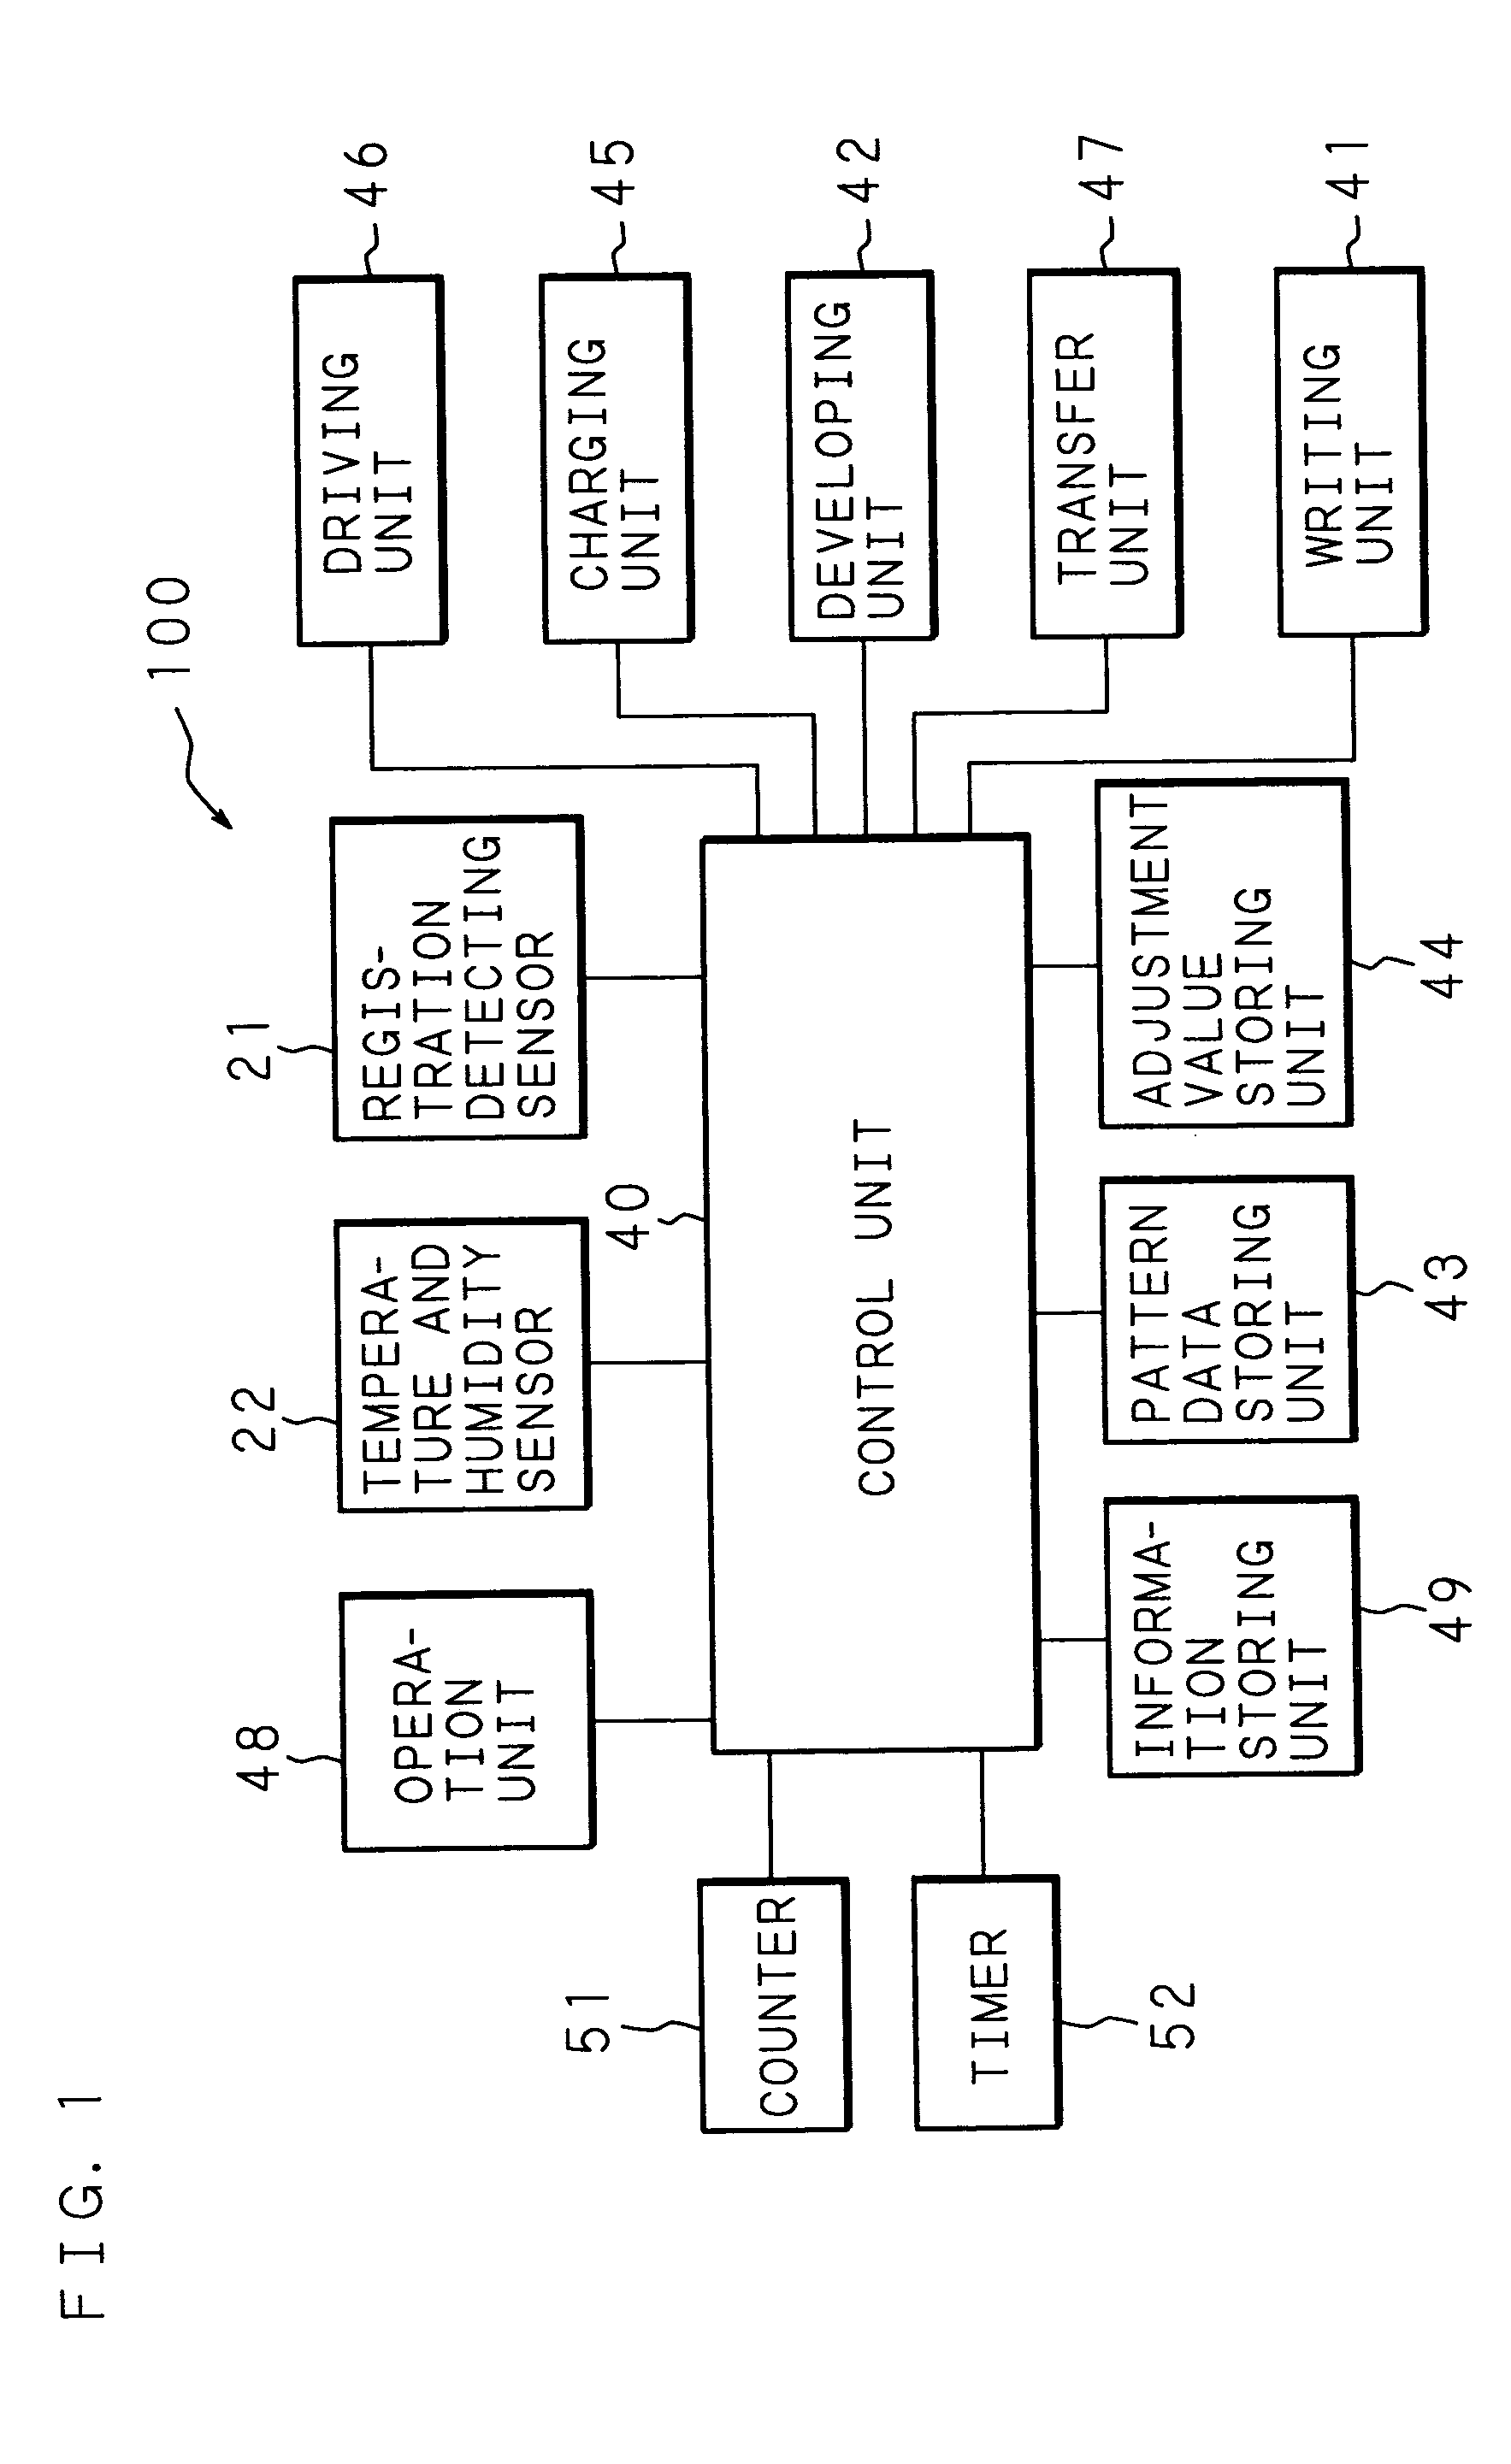 Image adjustment method and image forming apparatus